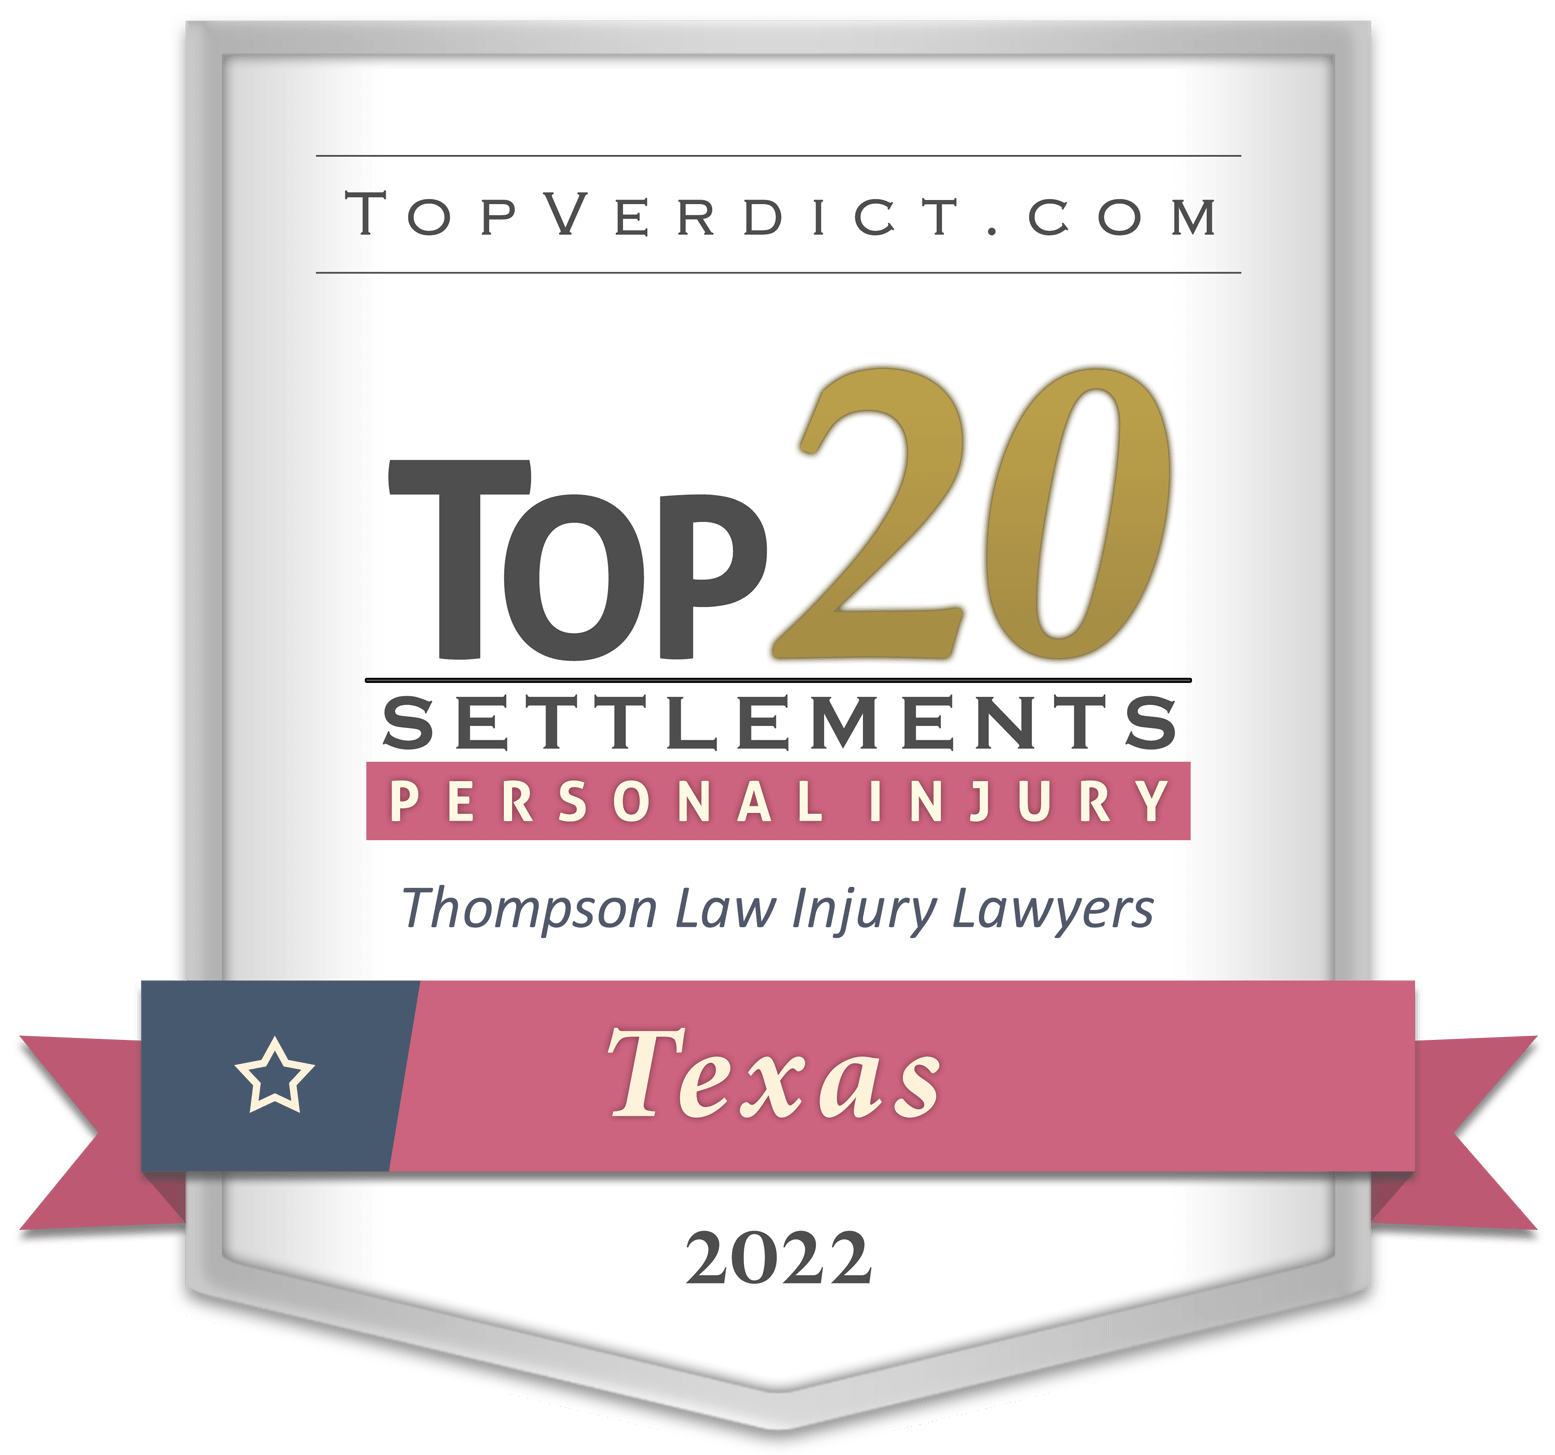 TopVerdict Top 20 personal injury settlements in Texas 2022 badge - Round Rock Personal Injury Law Firm